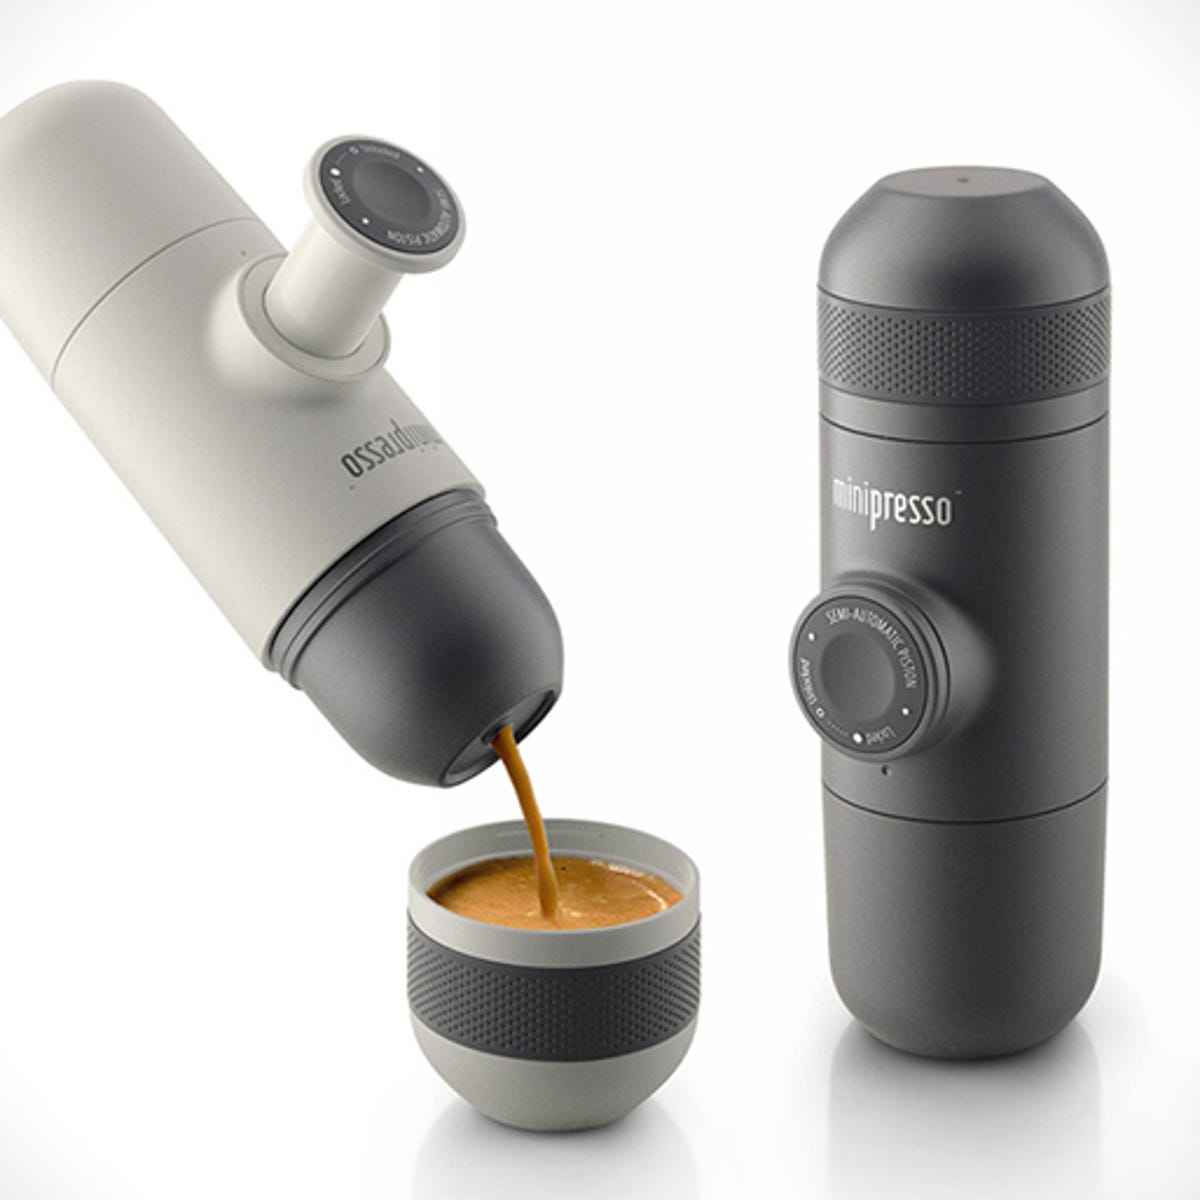 An espresso machine in your backpack? Minipresso says yes - CNET